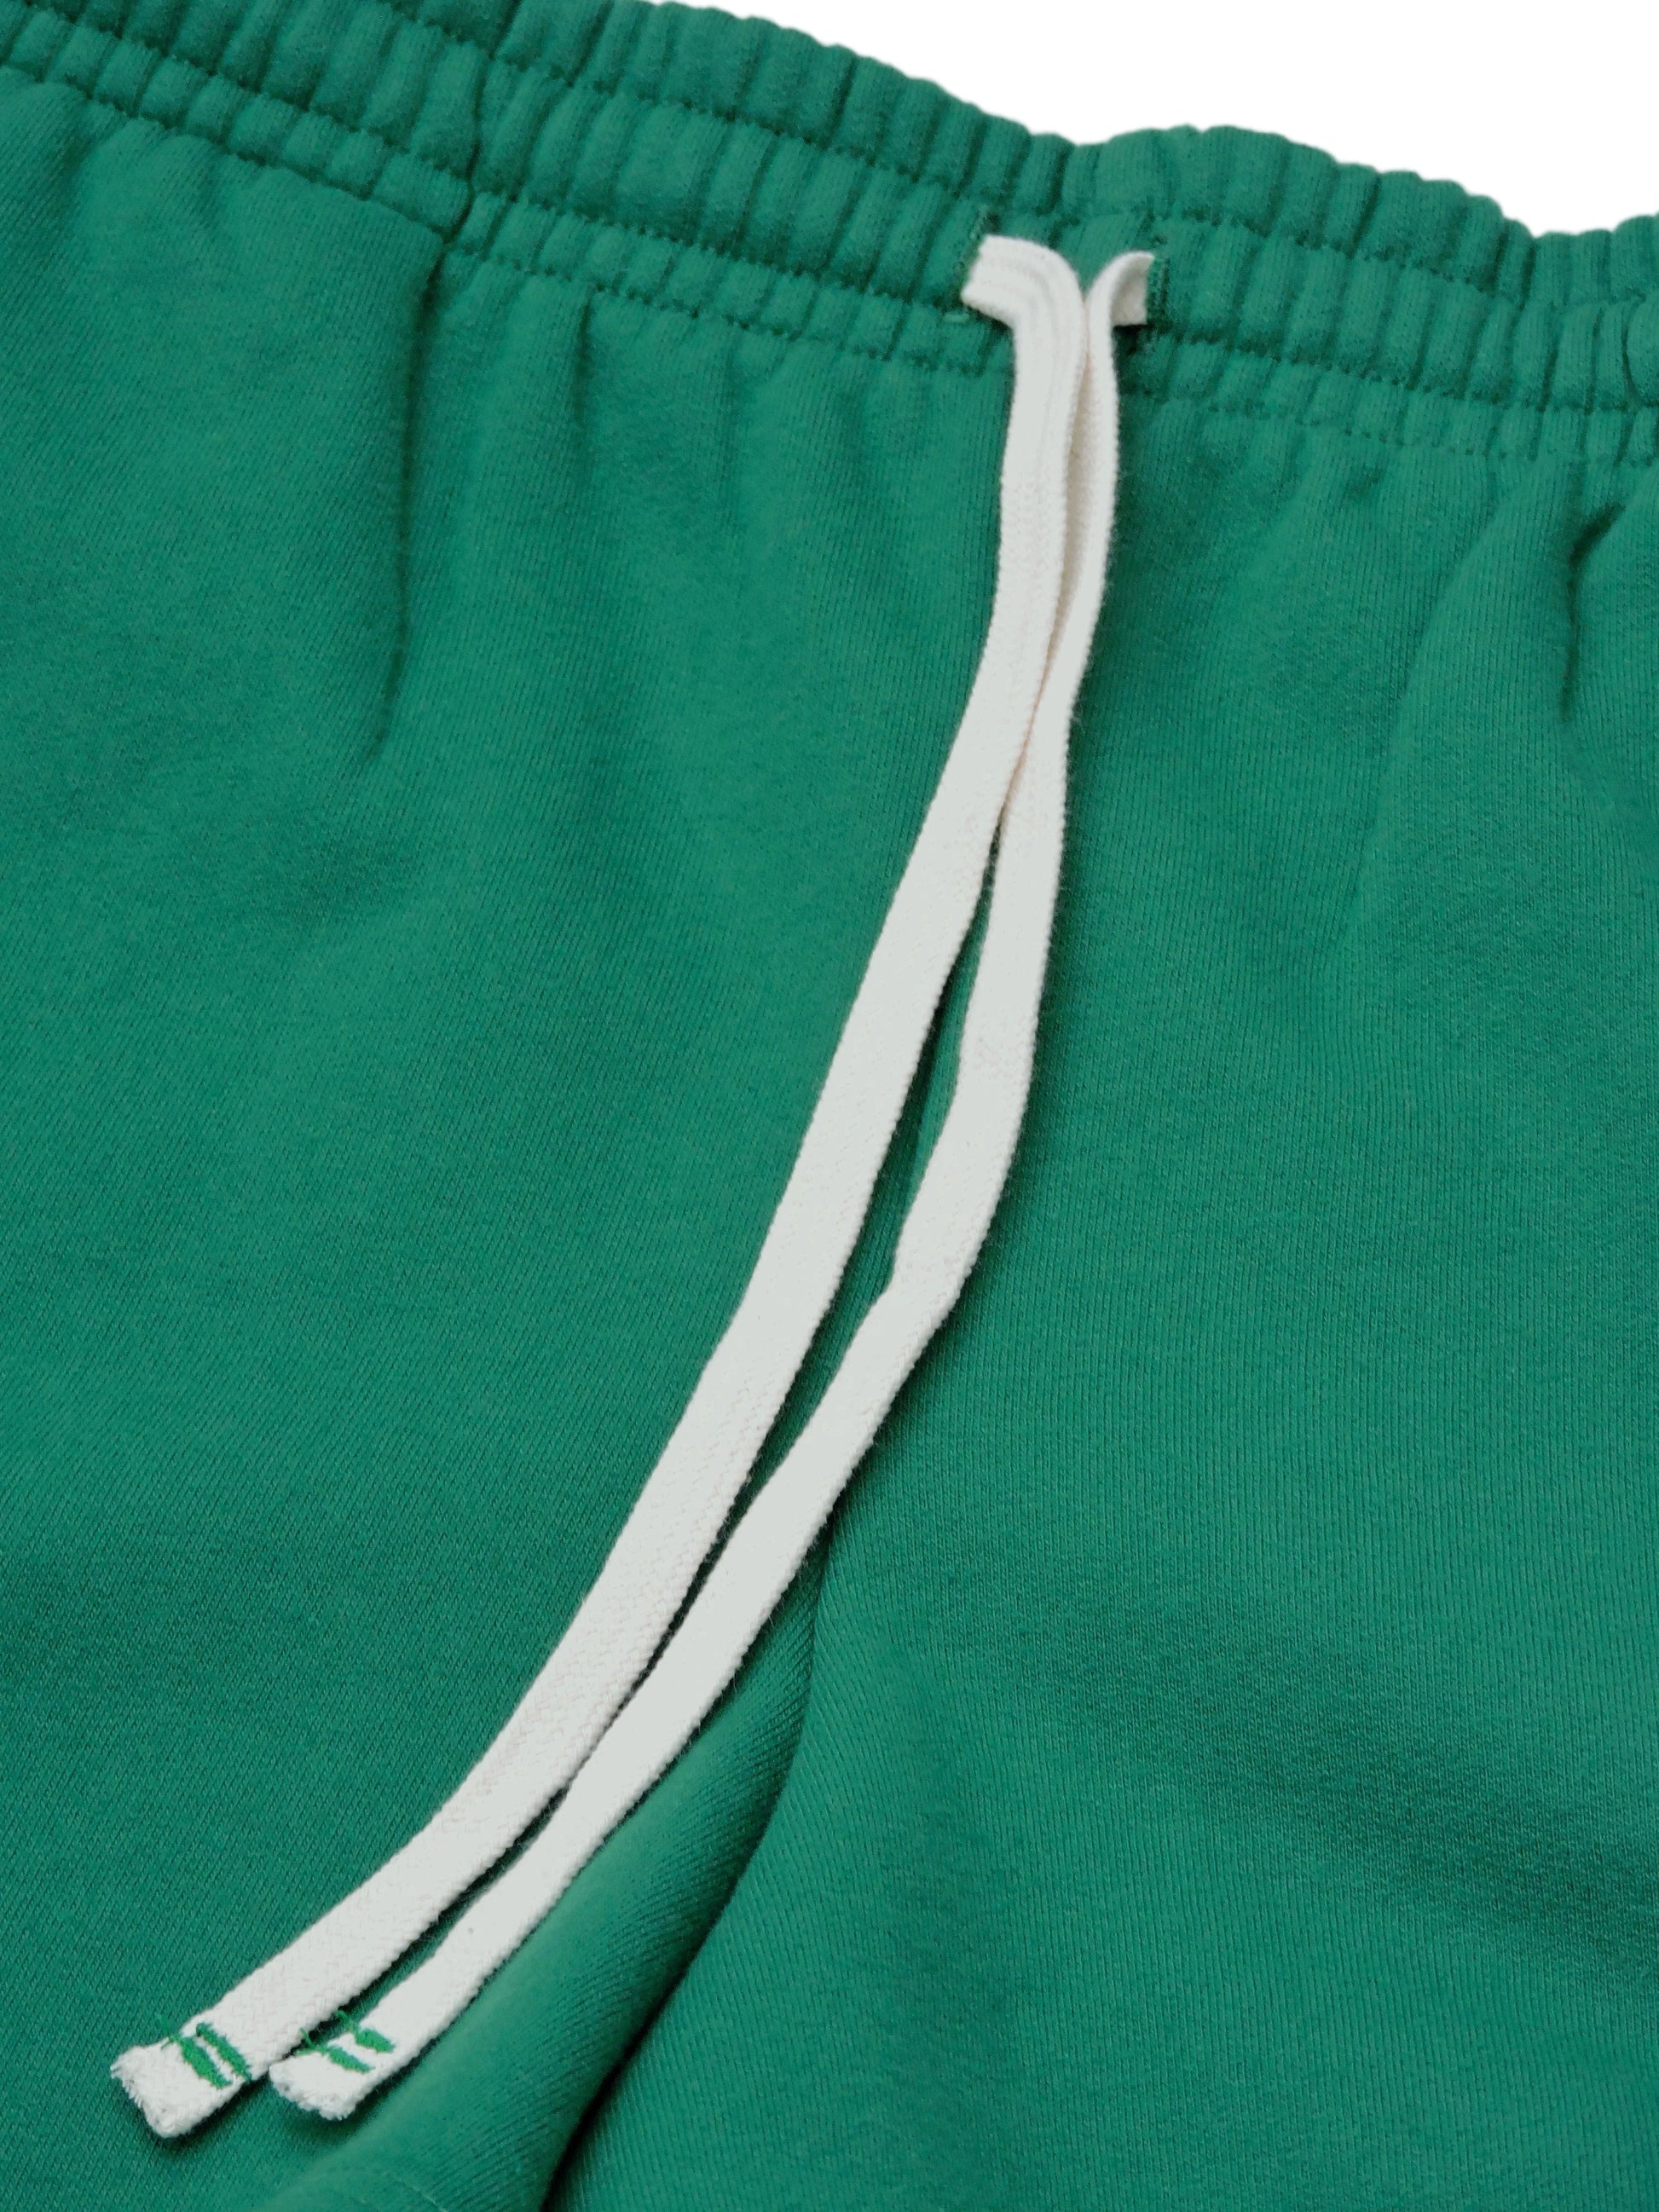 Close up of white drawstrings and waistband